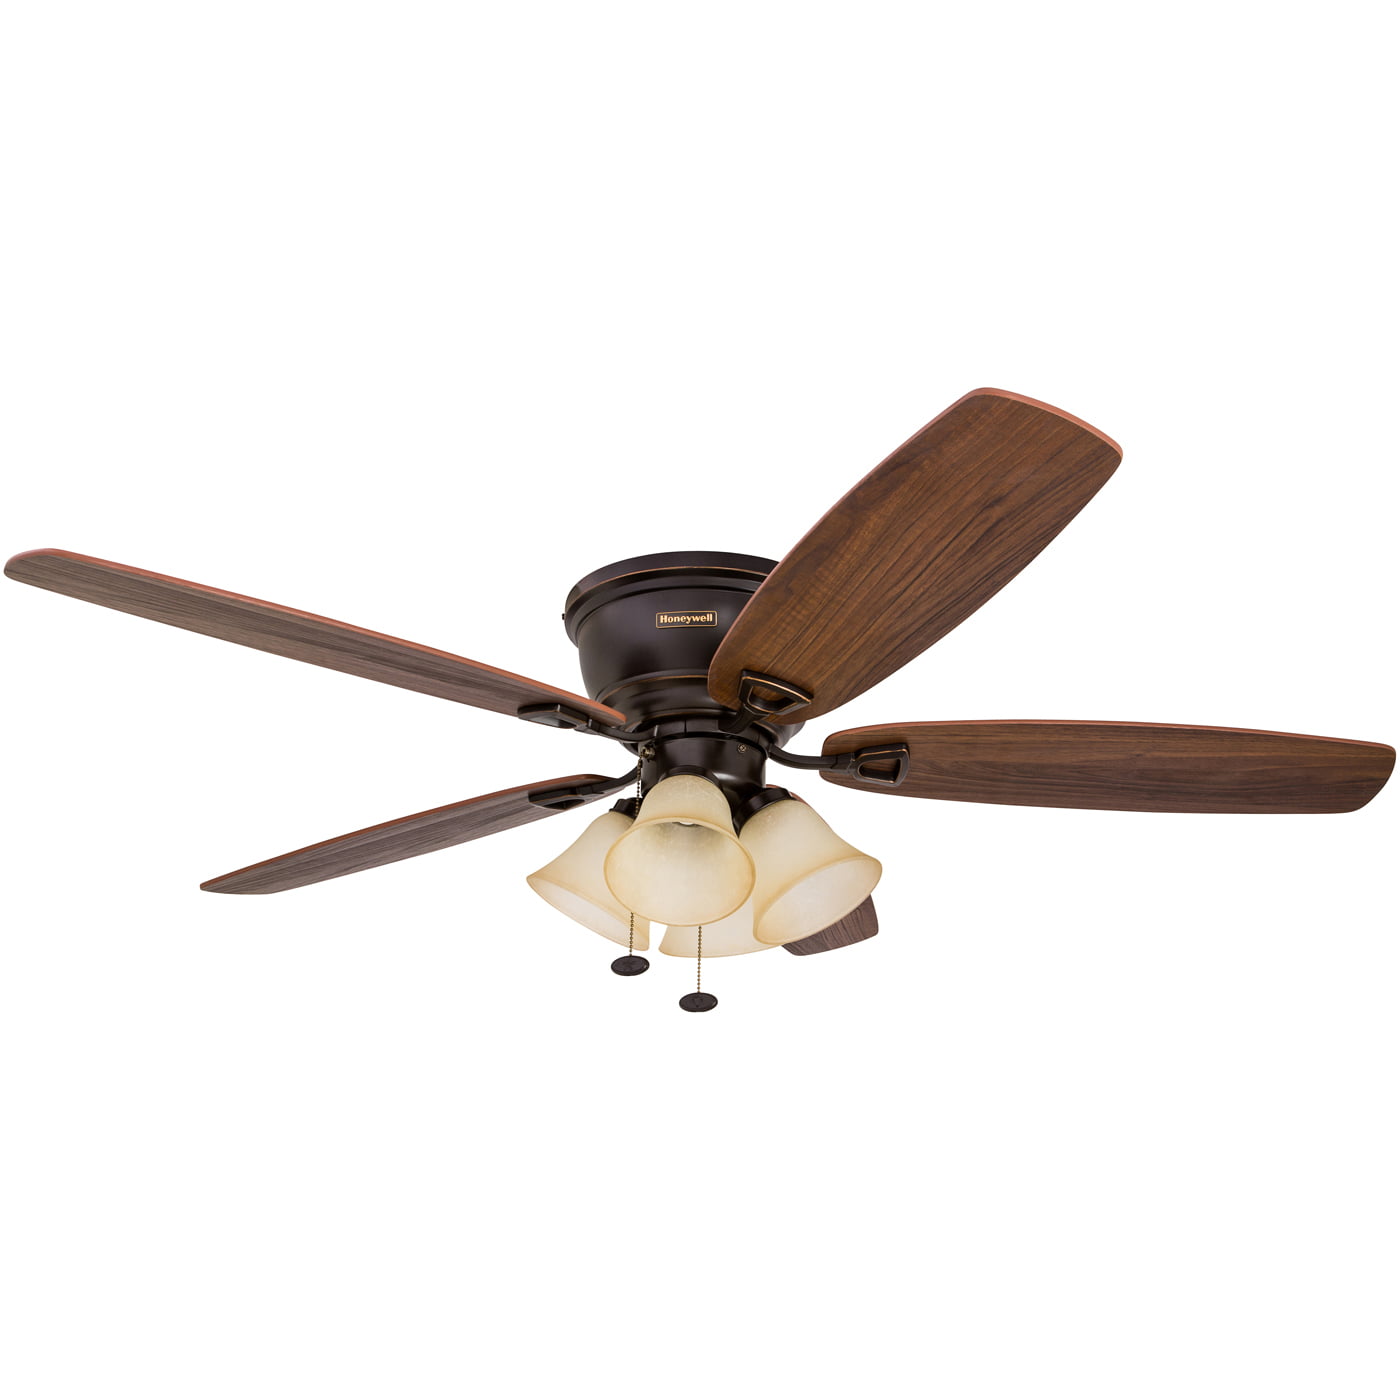 Hampton Bay Blair 52 in LED Oil-Rubbed Bronze Ceiling Fan Replacement Parts 